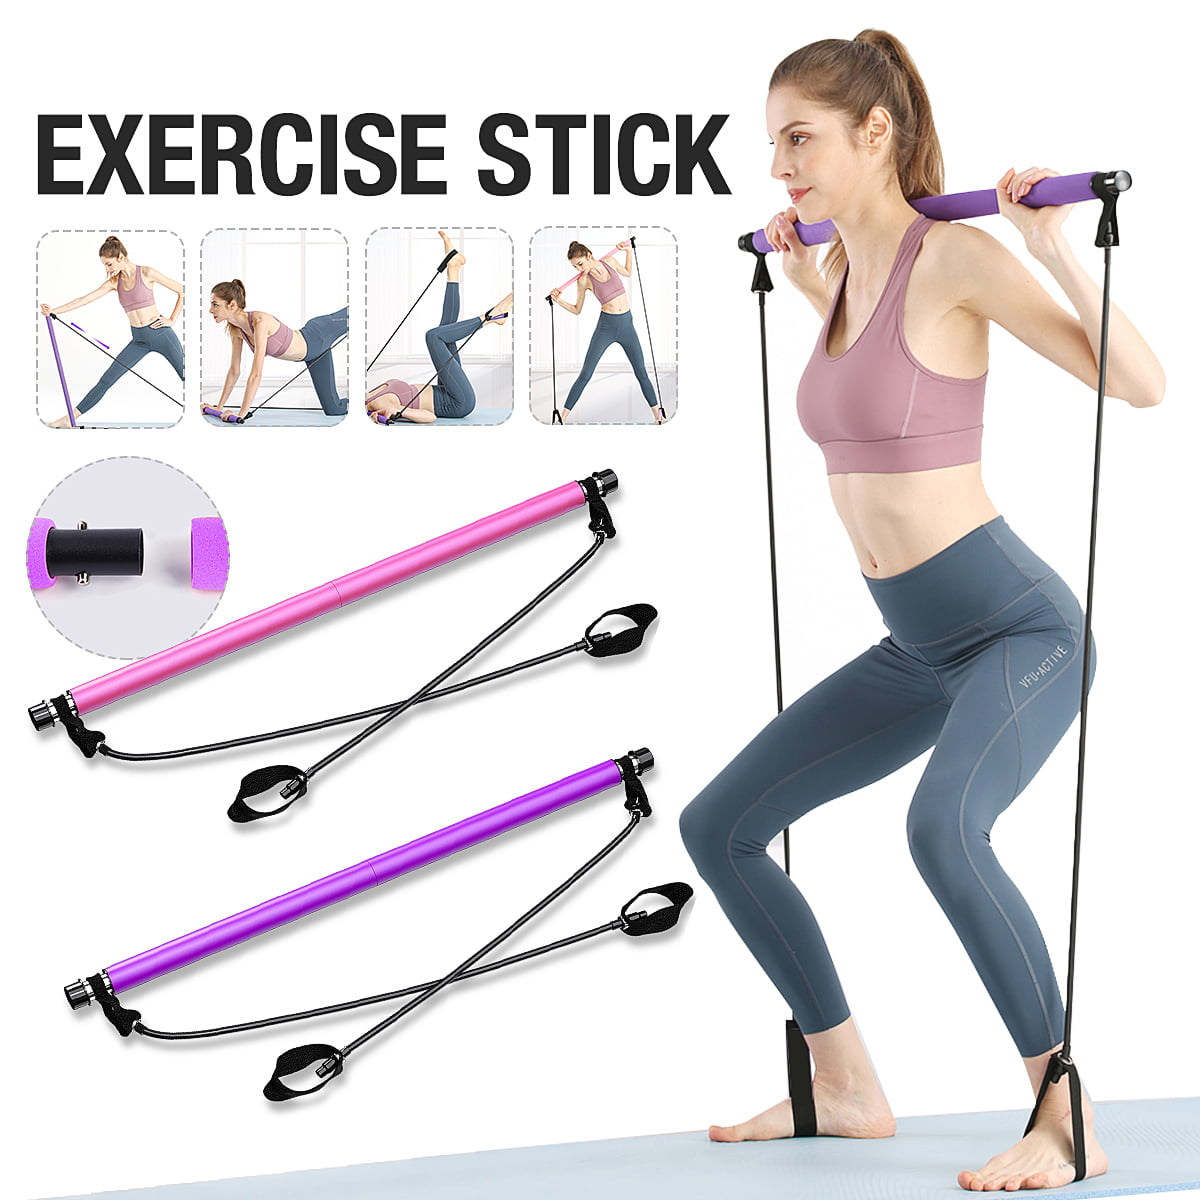 Resistance Band Fitness Yoga Gym Exercise Workout Crossfit Strength Training 